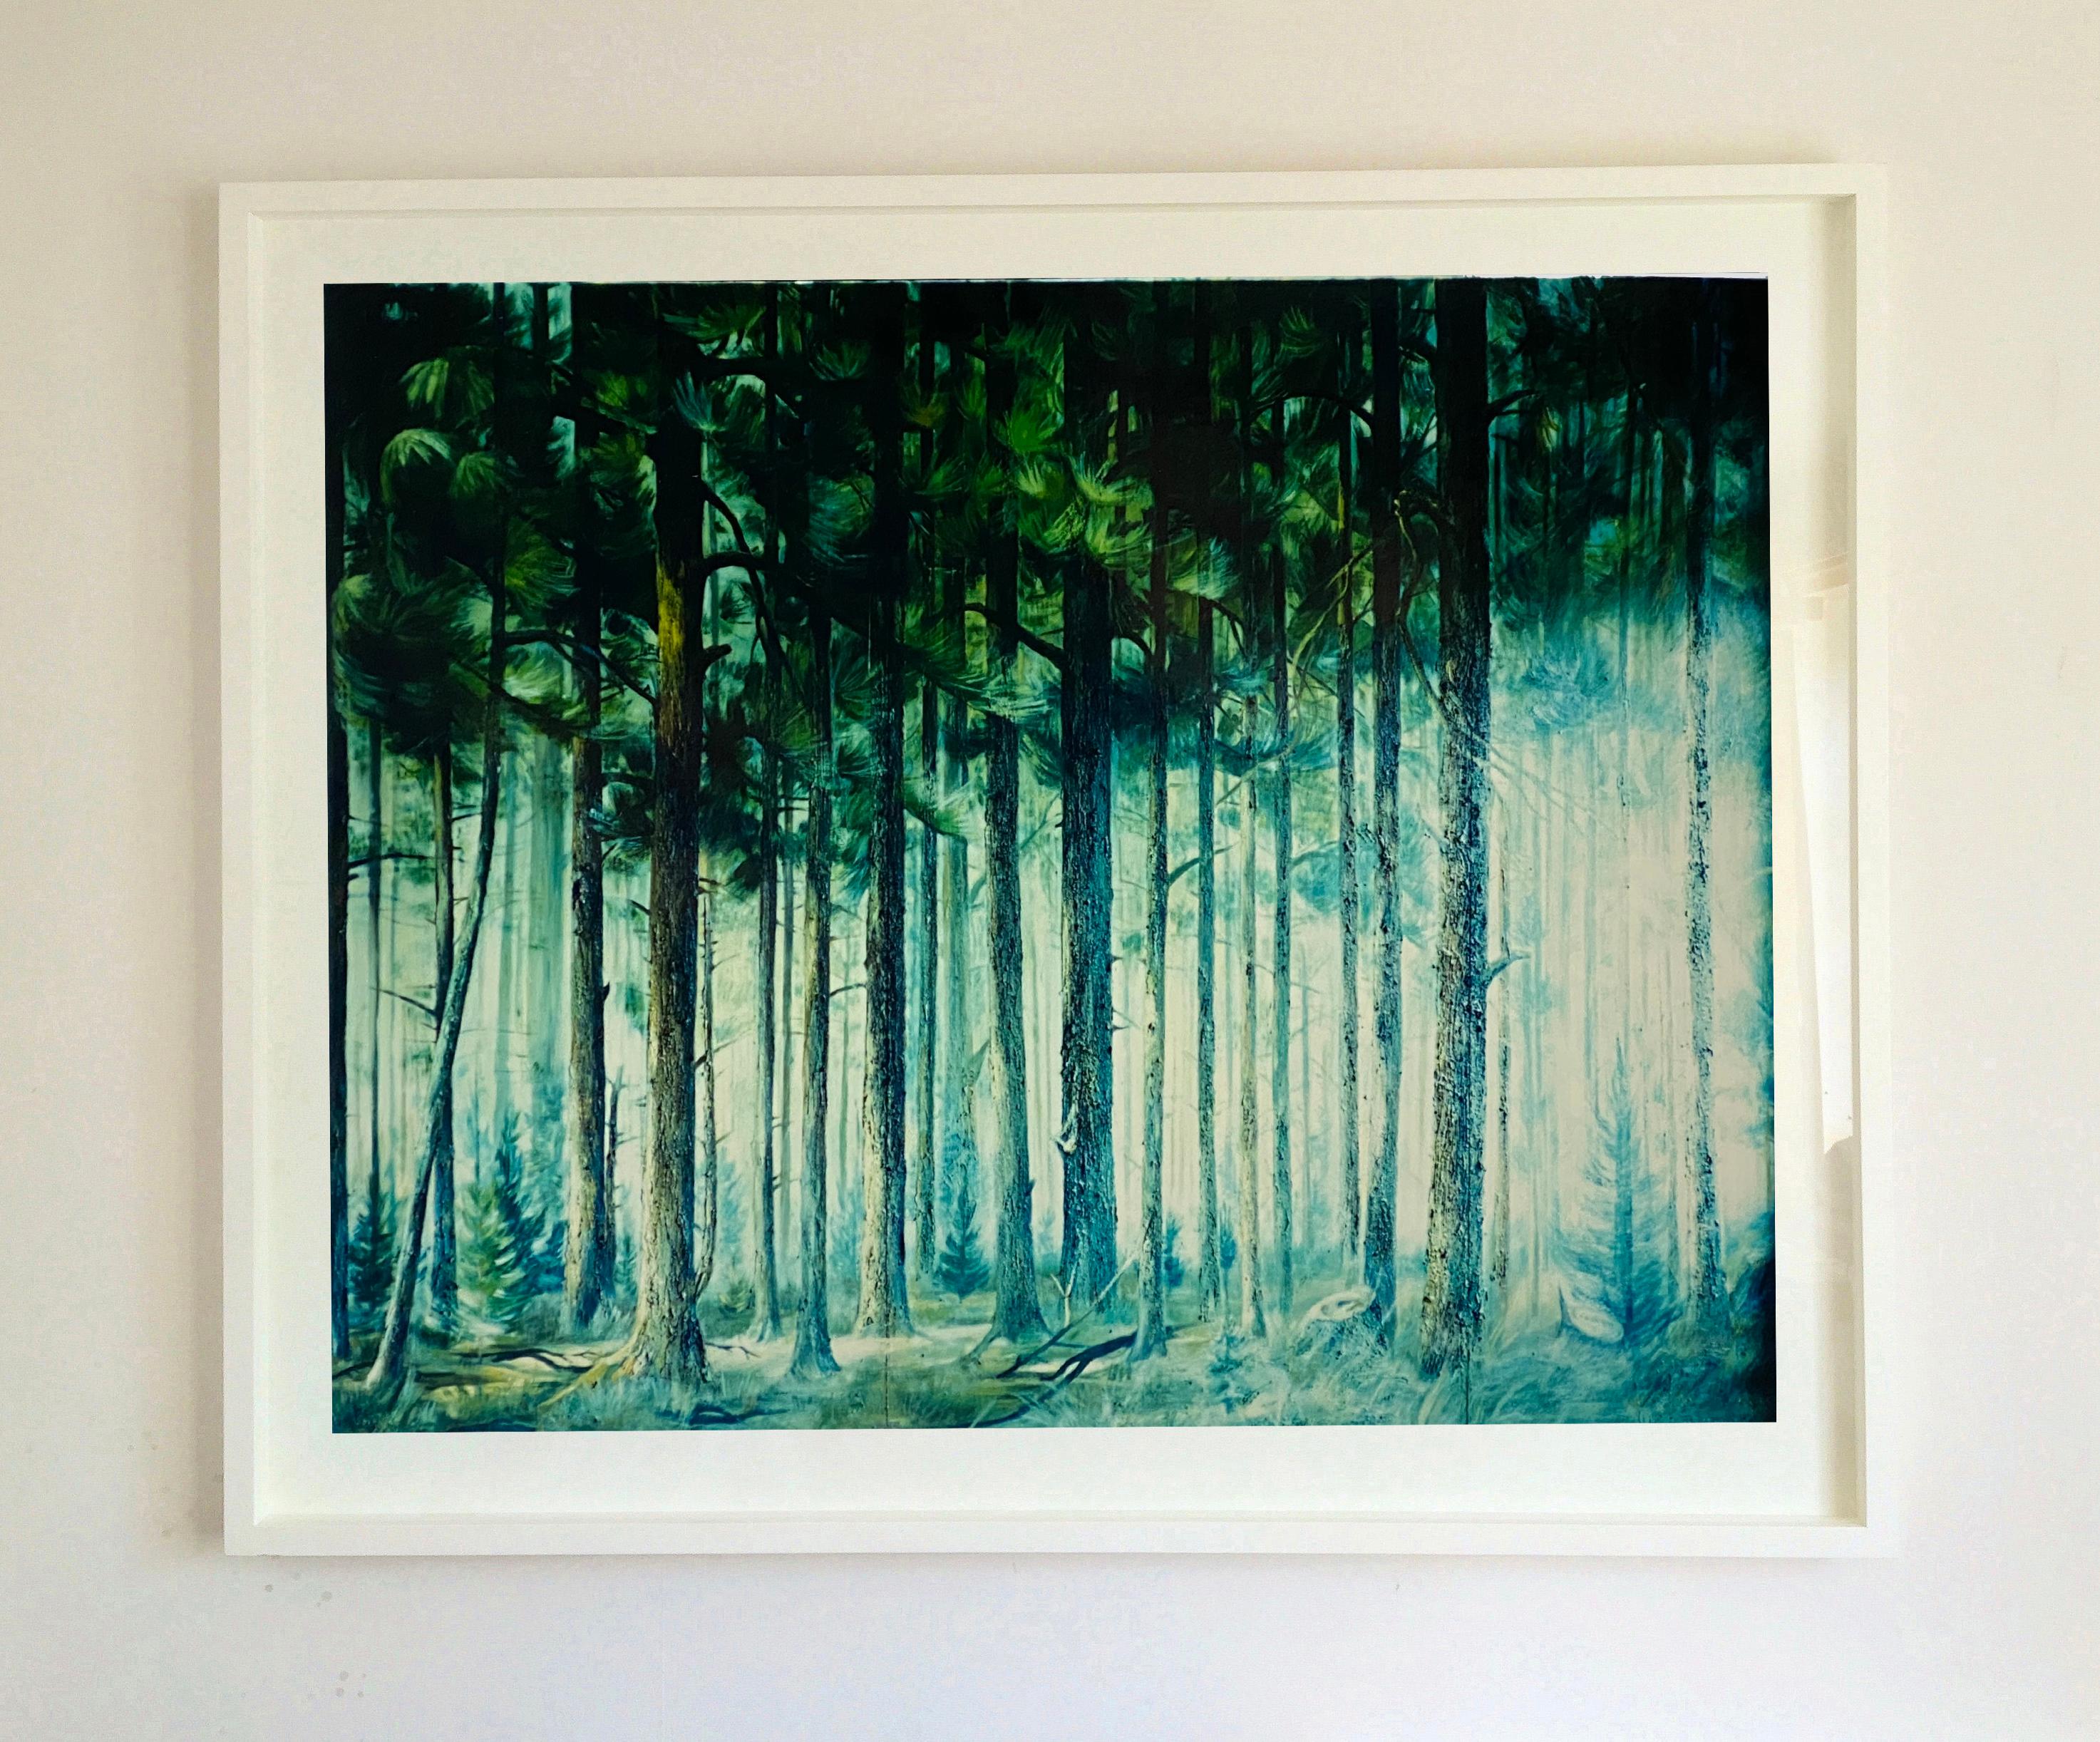 'Ray of Light', part of Richard Heeps Vietnam series 'This is Not America', this unusual photograph of trees has a spiritual quality. 

This artwork is a limited edition of 25 gloss photographic print made in the artist's darkroom. It is signed and